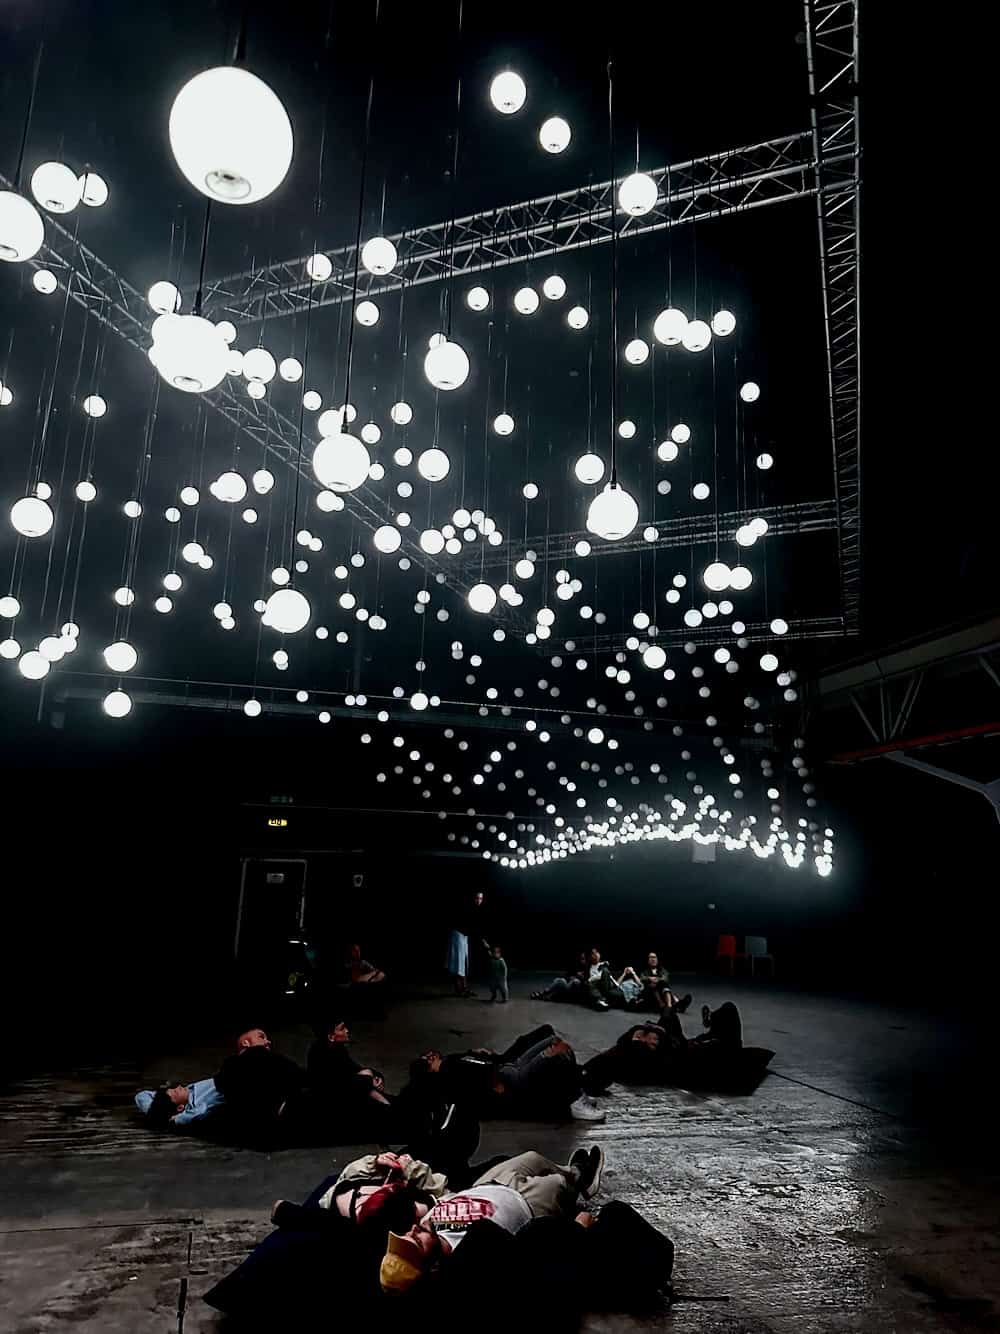 People relaxing on the floor watching the light patterns above them at Squidshow's Beyond Submergence Exhibition at Propyard. 
Check out the rest of the guide for loads more info about what's on in Bristol this summer!